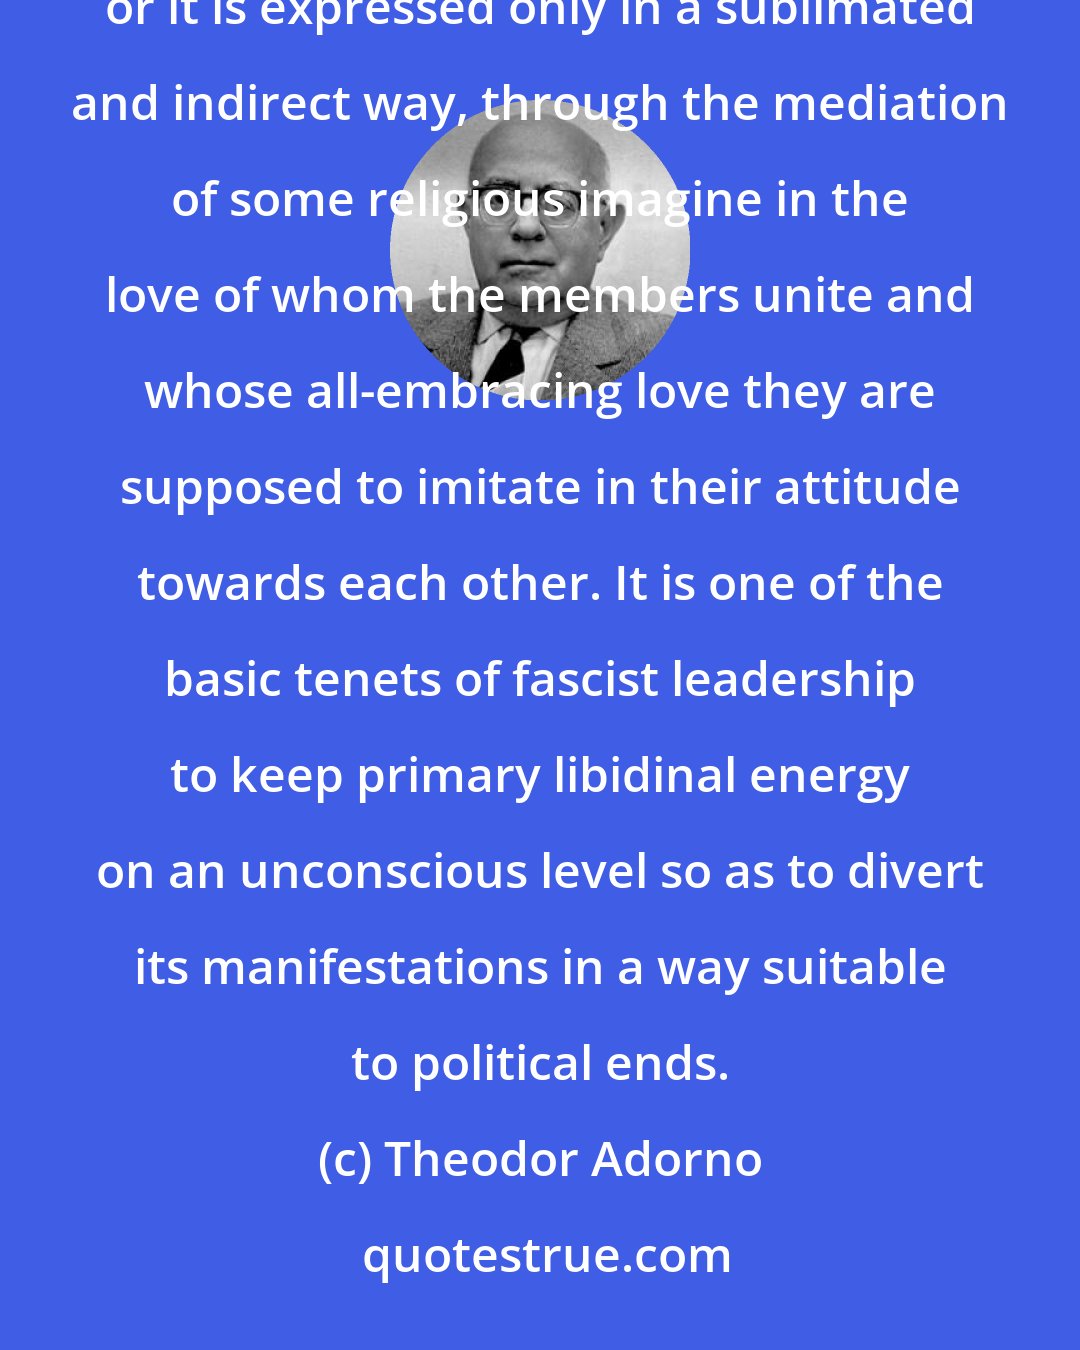 Theodor Adorno: In organized groups such as the army or the Church there is either no mention of love whatsoever between the members, or it is expressed only in a sublimated and indirect way, through the mediation of some religious imagine in the love of whom the members unite and whose all-embracing love they are supposed to imitate in their attitude towards each other. It is one of the basic tenets of fascist leadership to keep primary libidinal energy on an unconscious level so as to divert its manifestations in a way suitable to political ends.